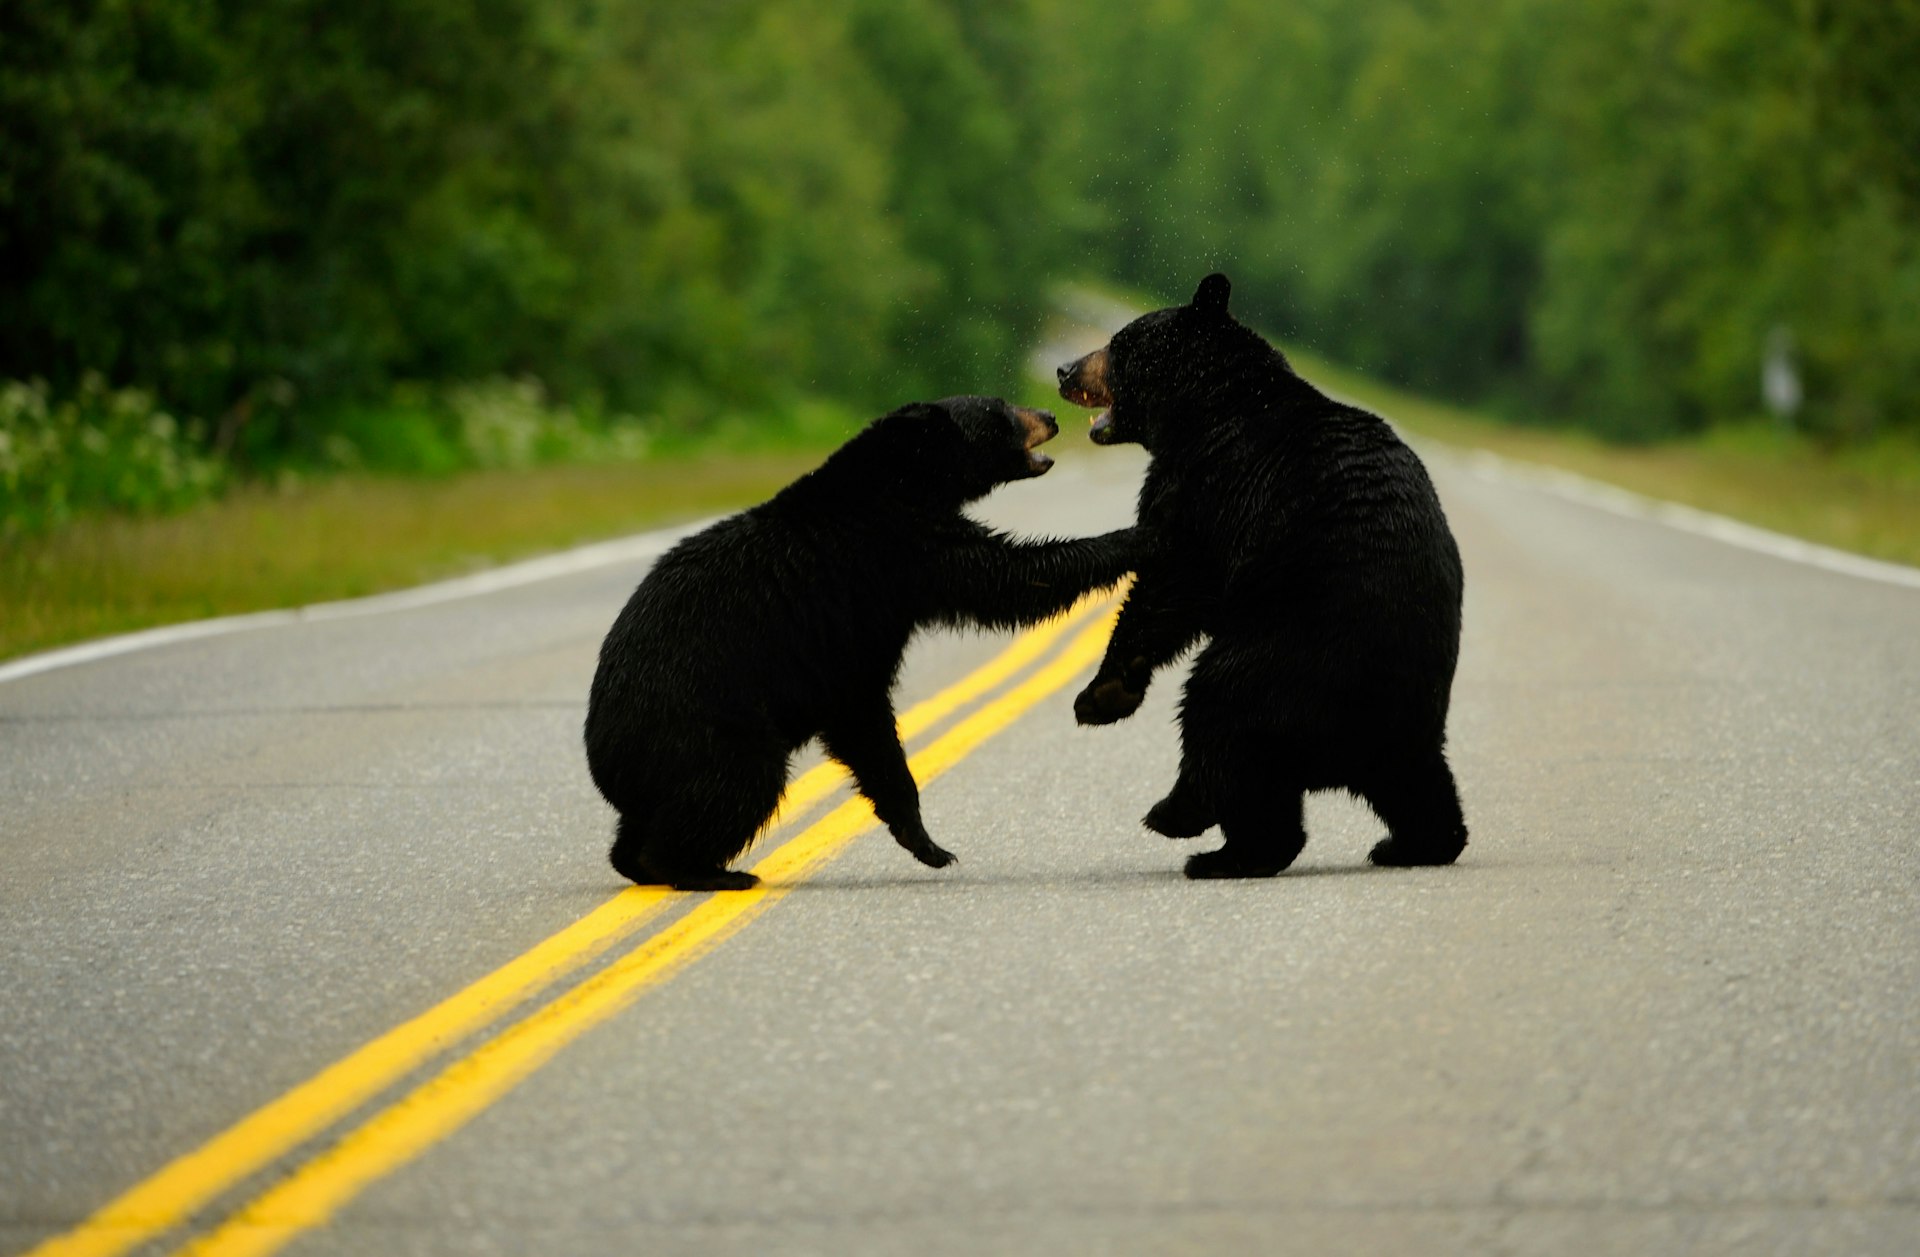 Two black bears interact on a paved road with a double yellow line with trees on either side